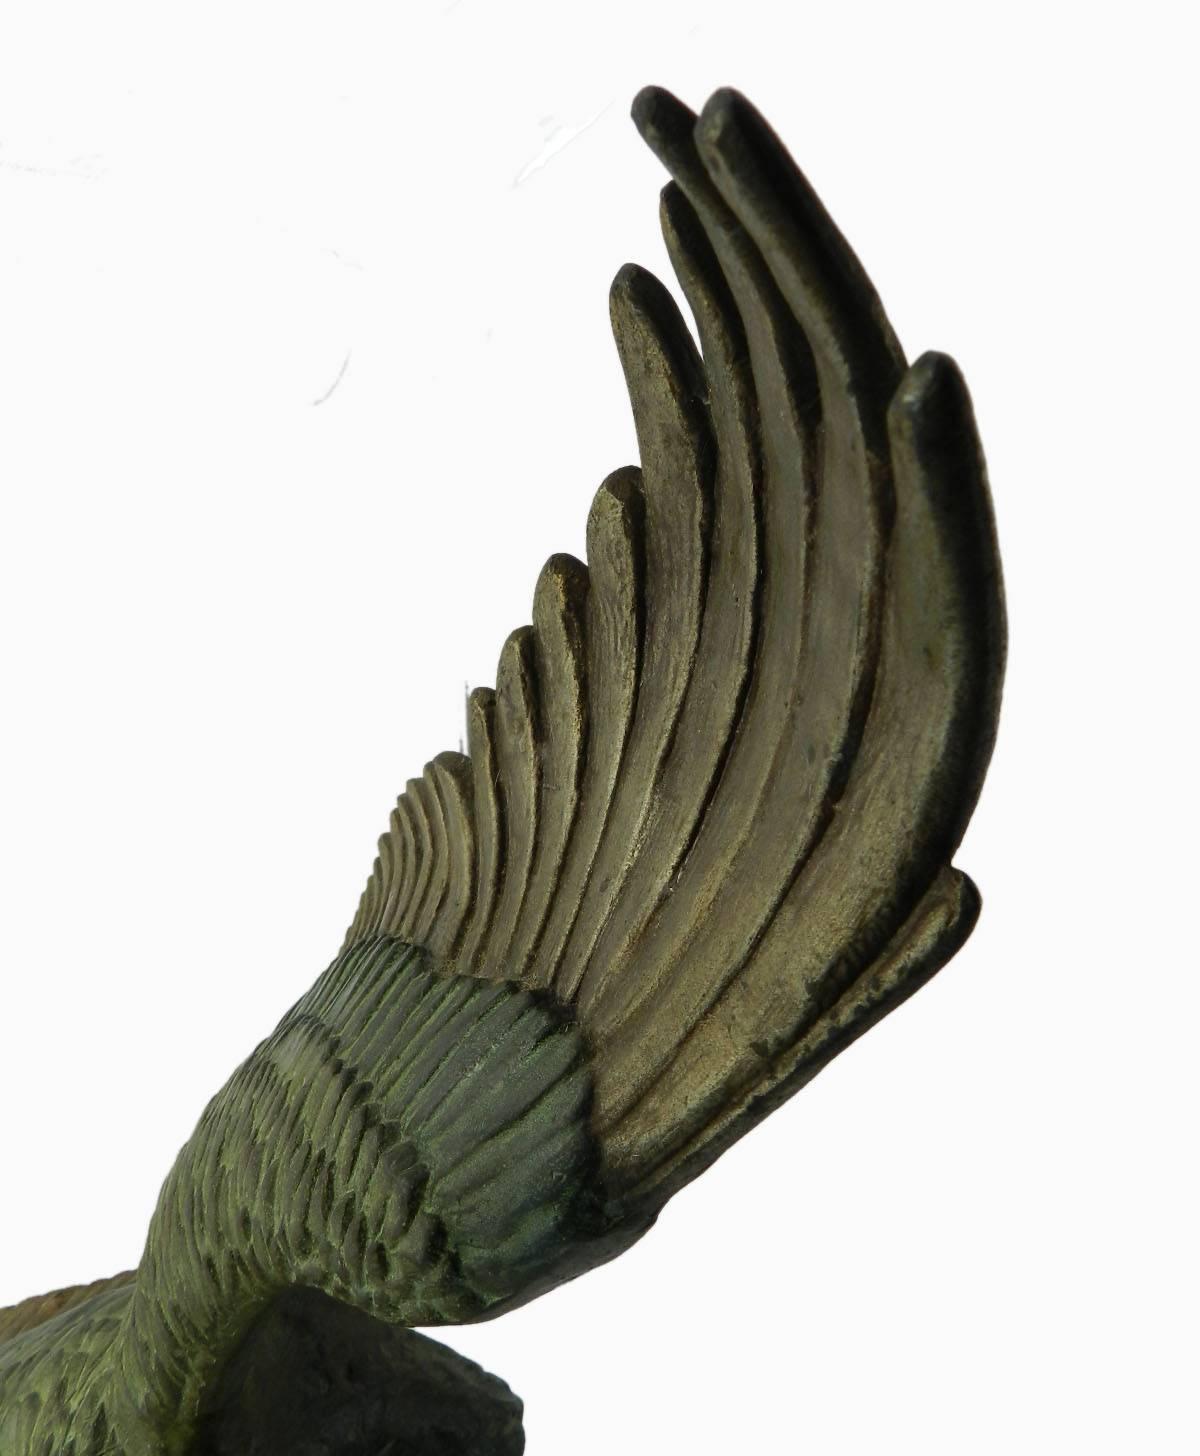 Mid-20th Century Art Deco Eagle in Flight by Rulas Signed Sculpture on Marble Base Animalia